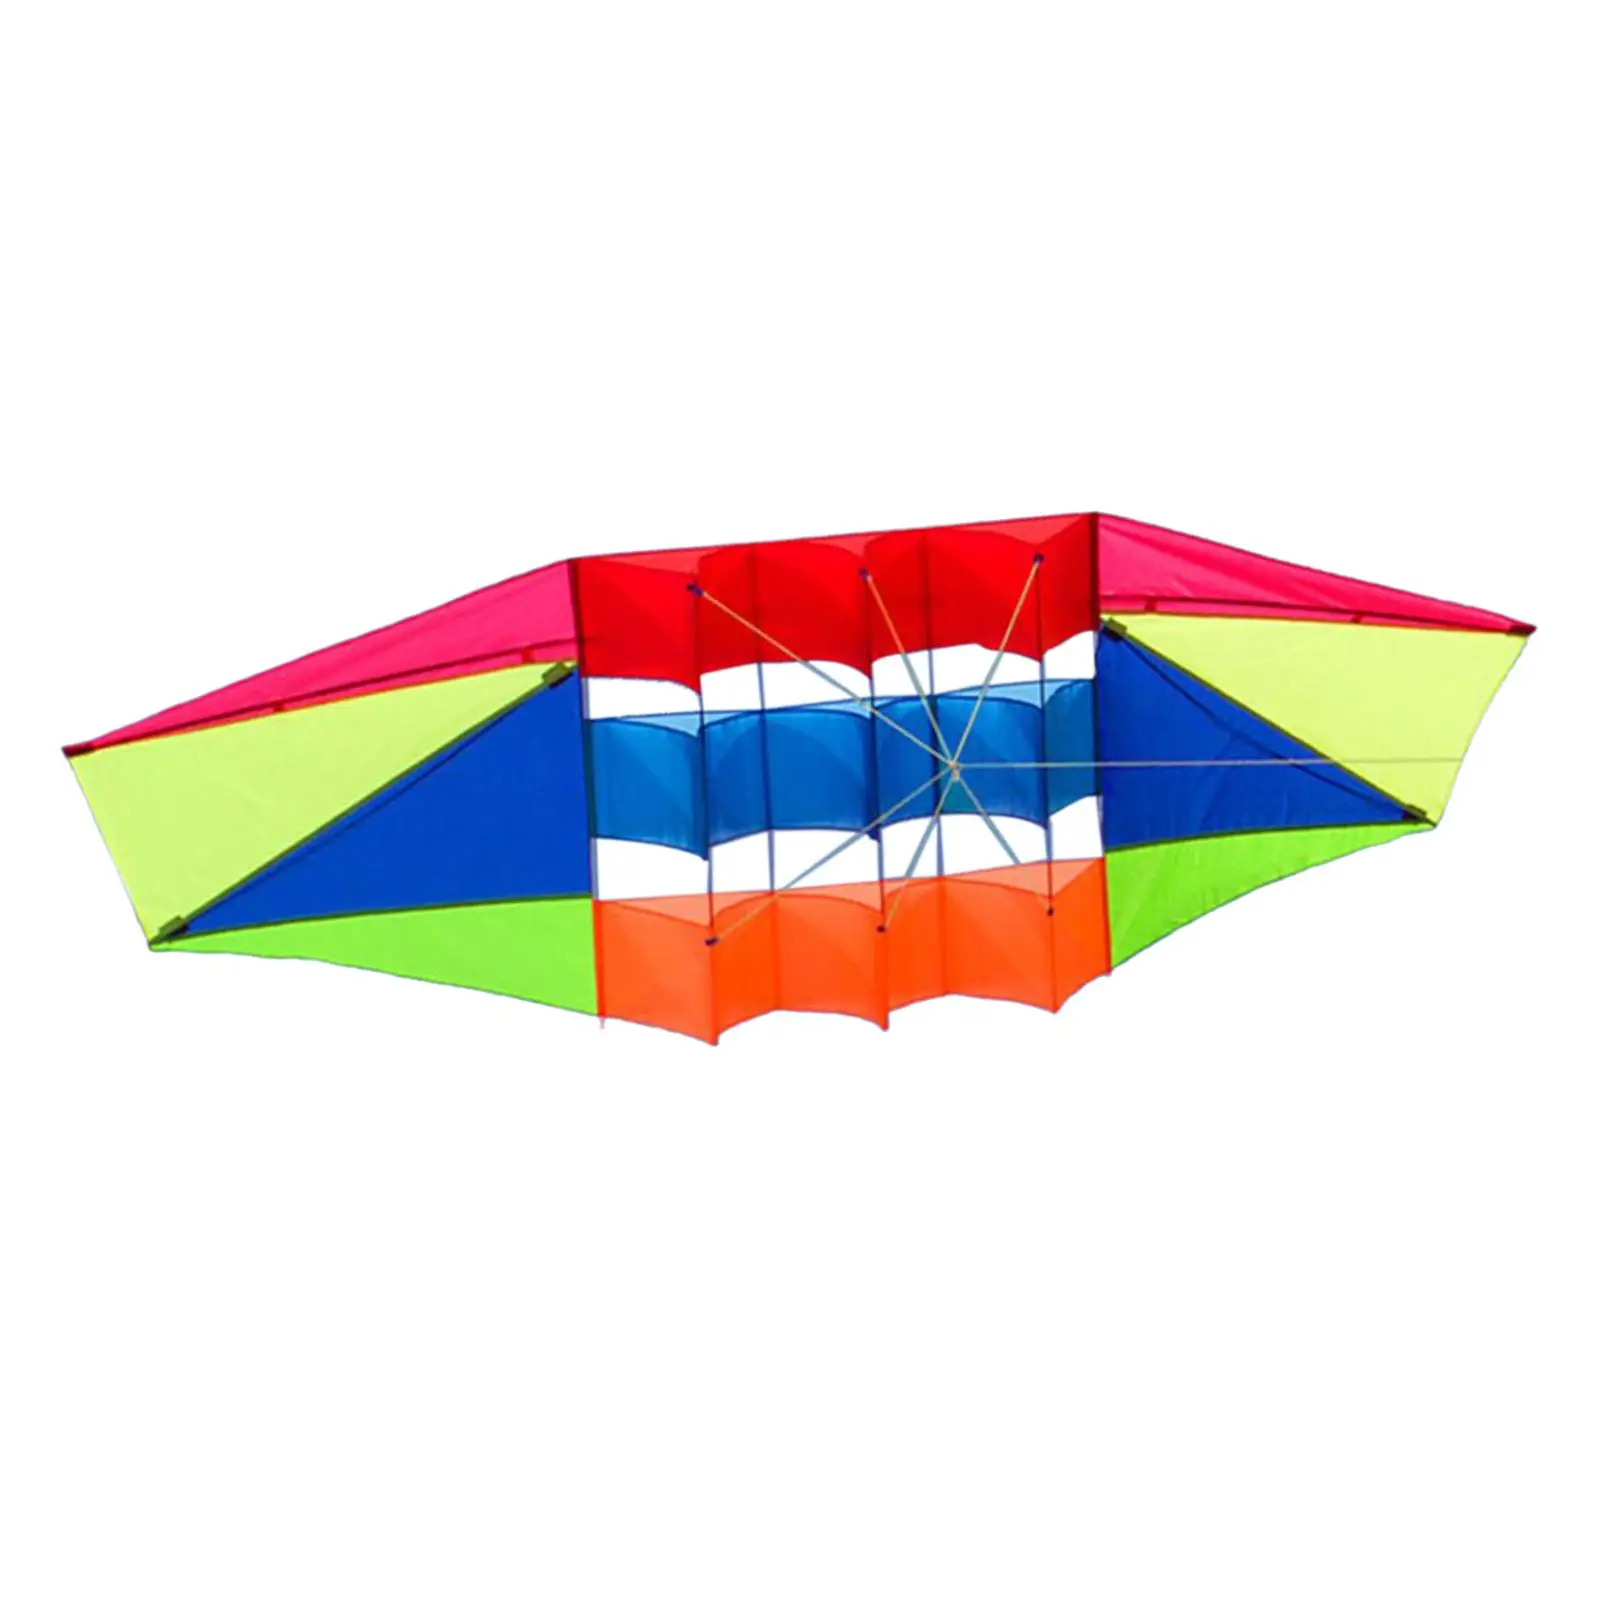  Outdoor Games Activities Parachute Easy to Fly Single Line s for Children